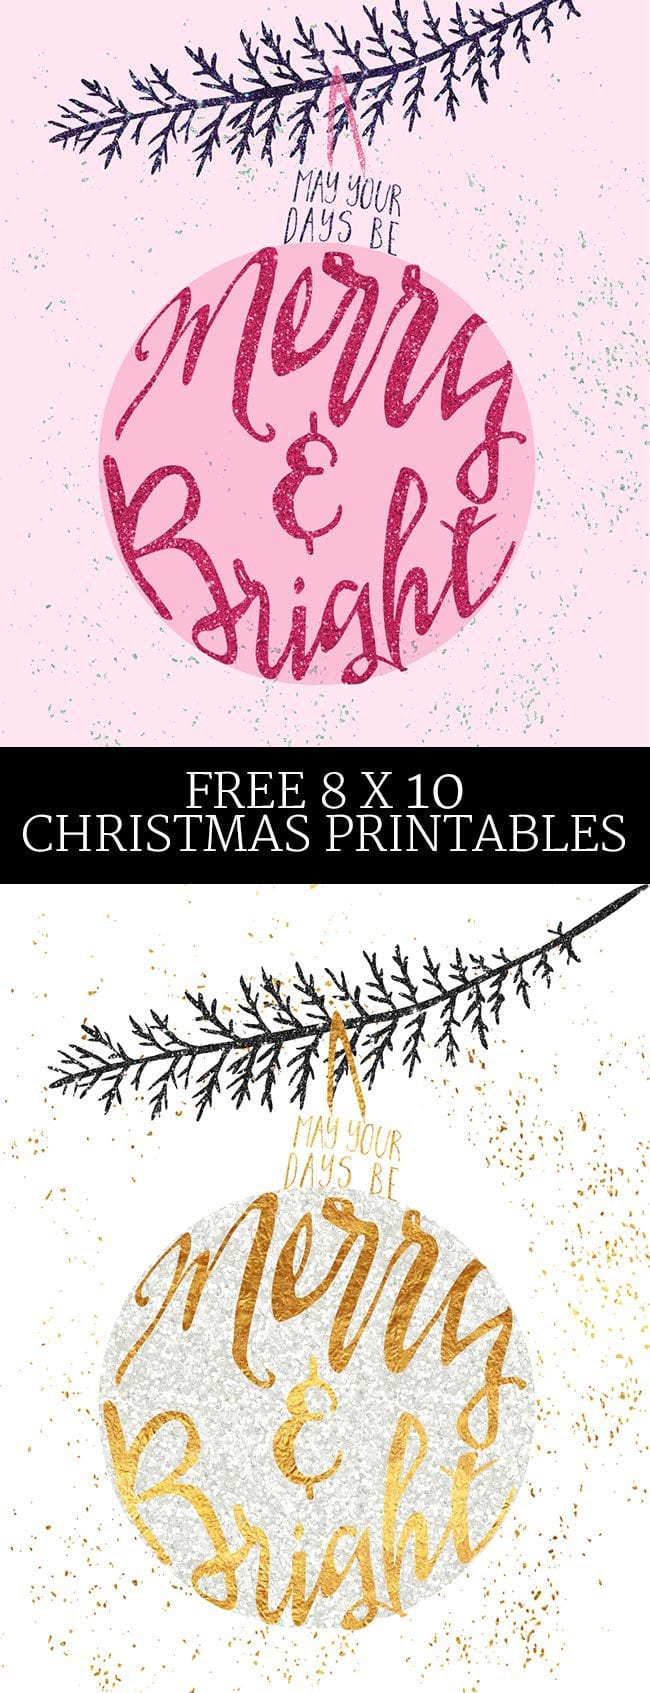 Free Christmas Decor!?! Print out this 8x10 Christmas print in either pink or gold and then place in your favorite 8x10 frame for 